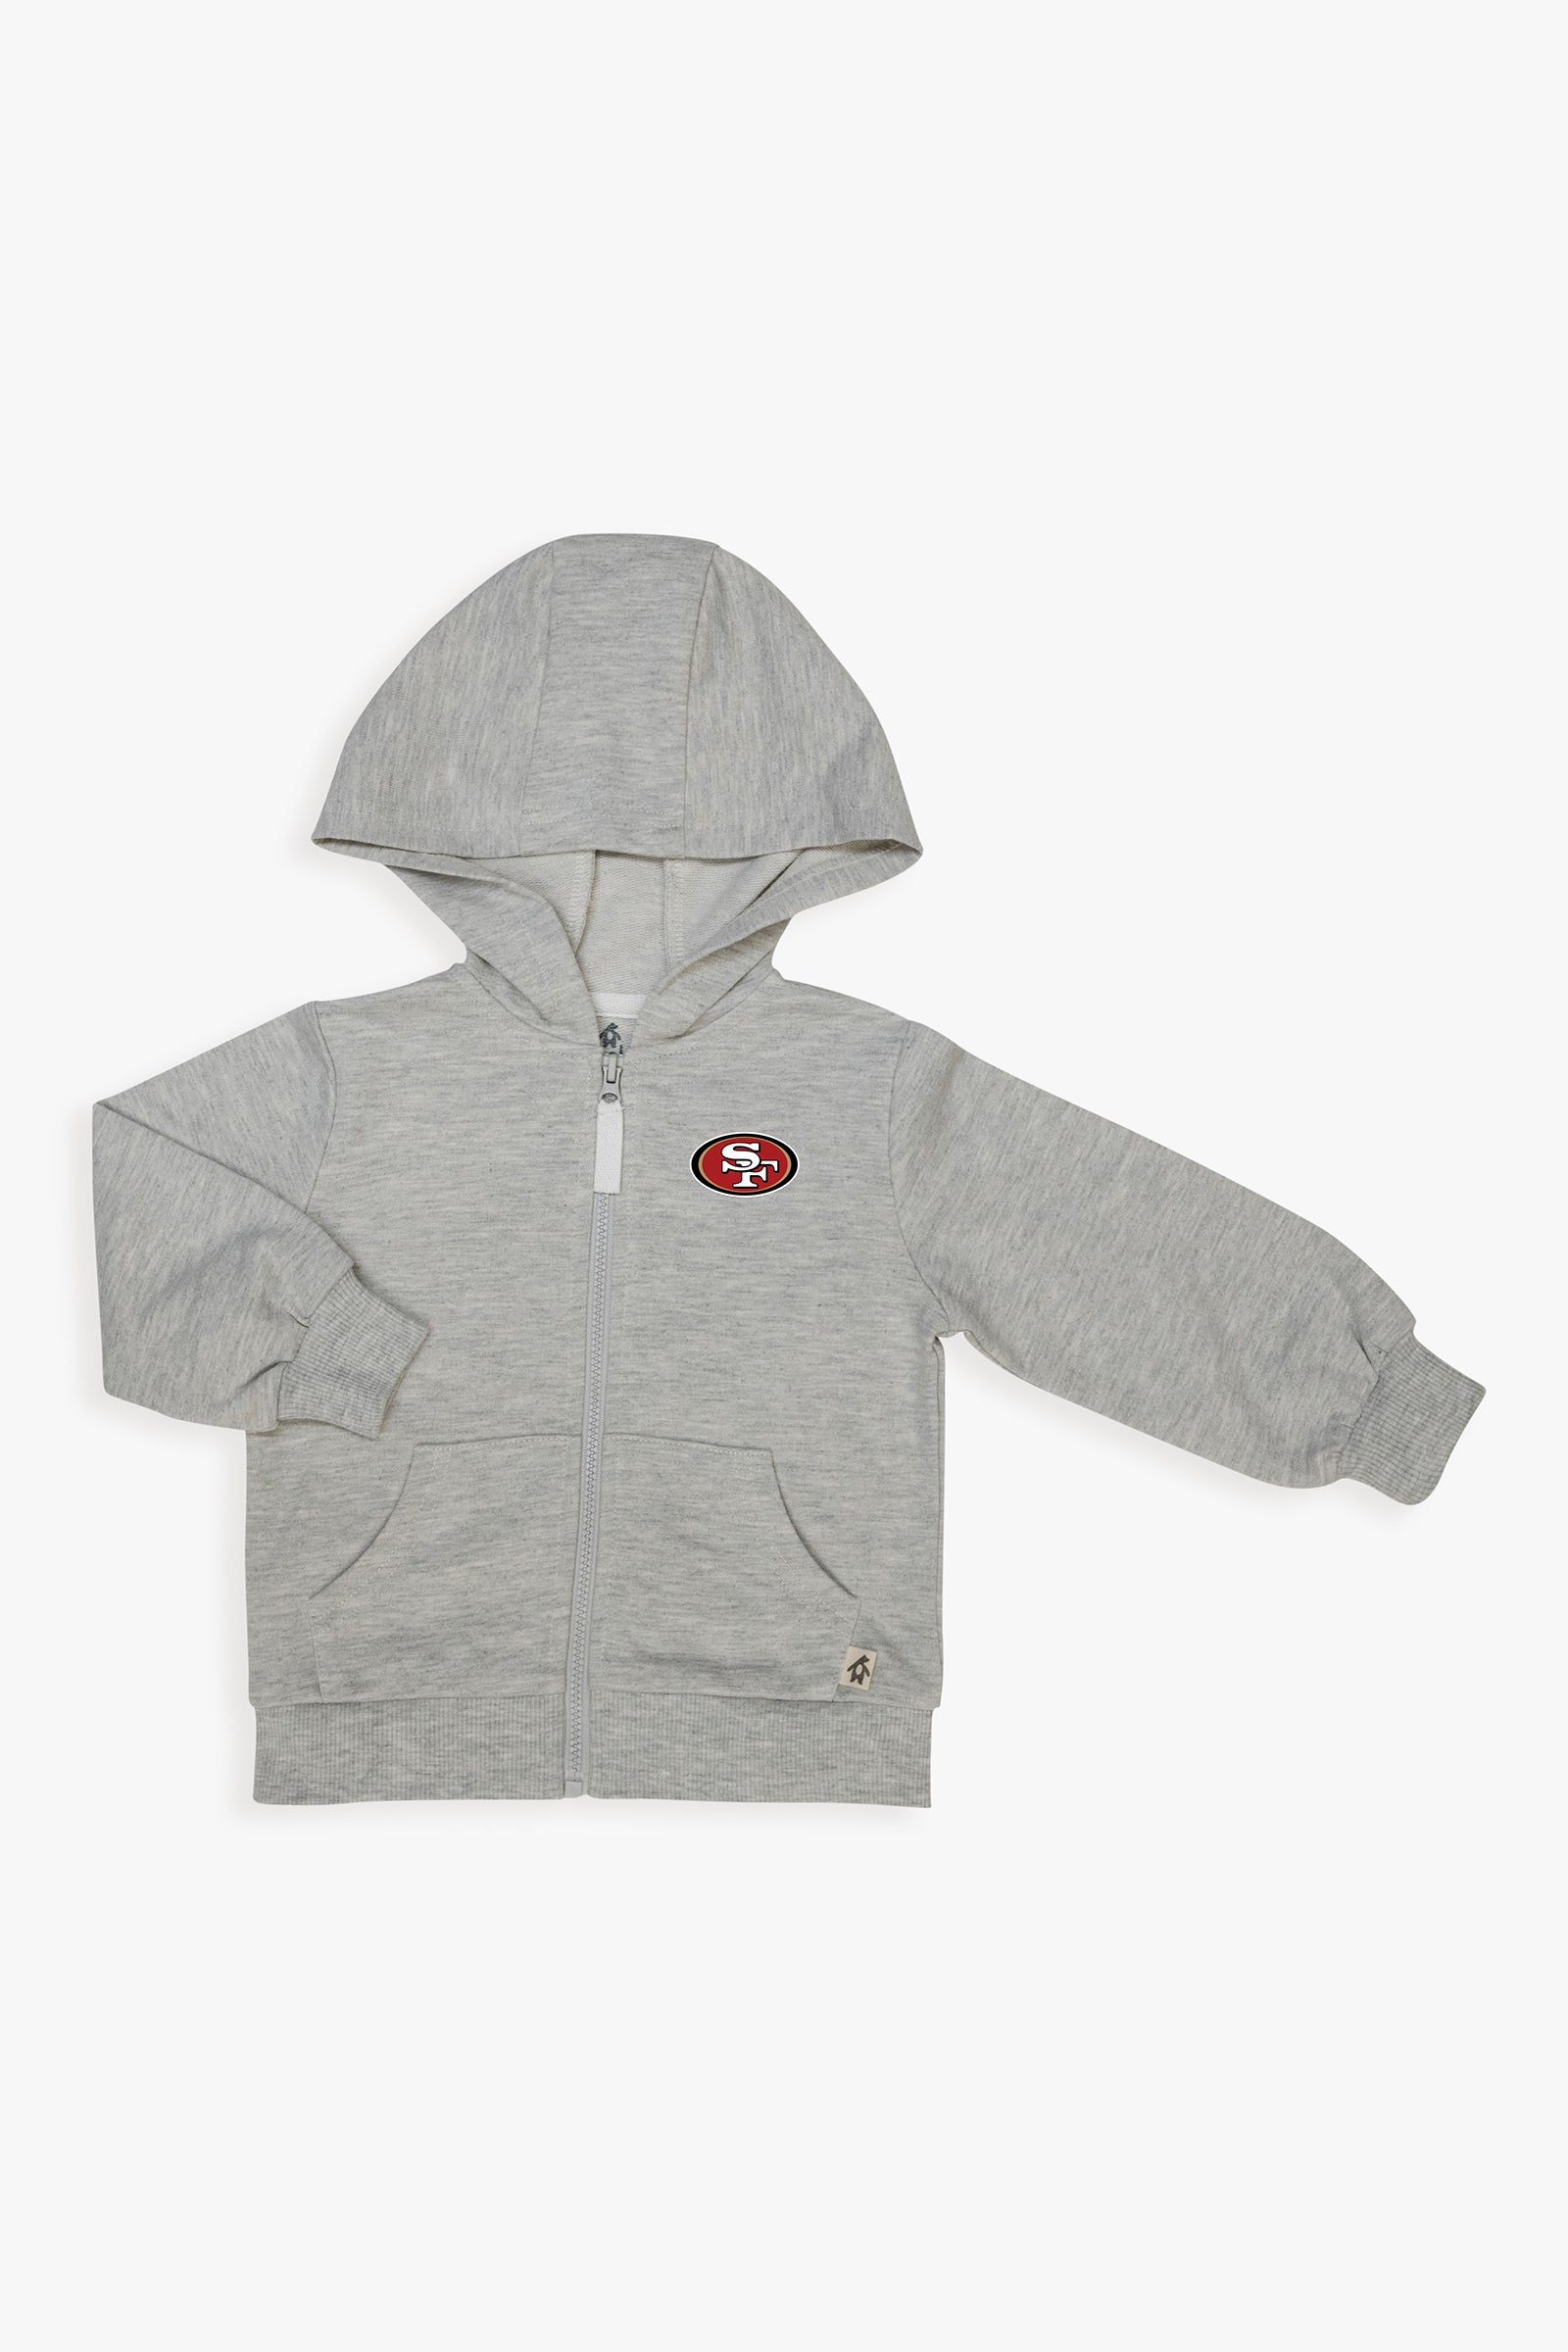 Hoodie Unisex Baby Logo Zip-Up Terry French NFL Grey Team Football Toddler